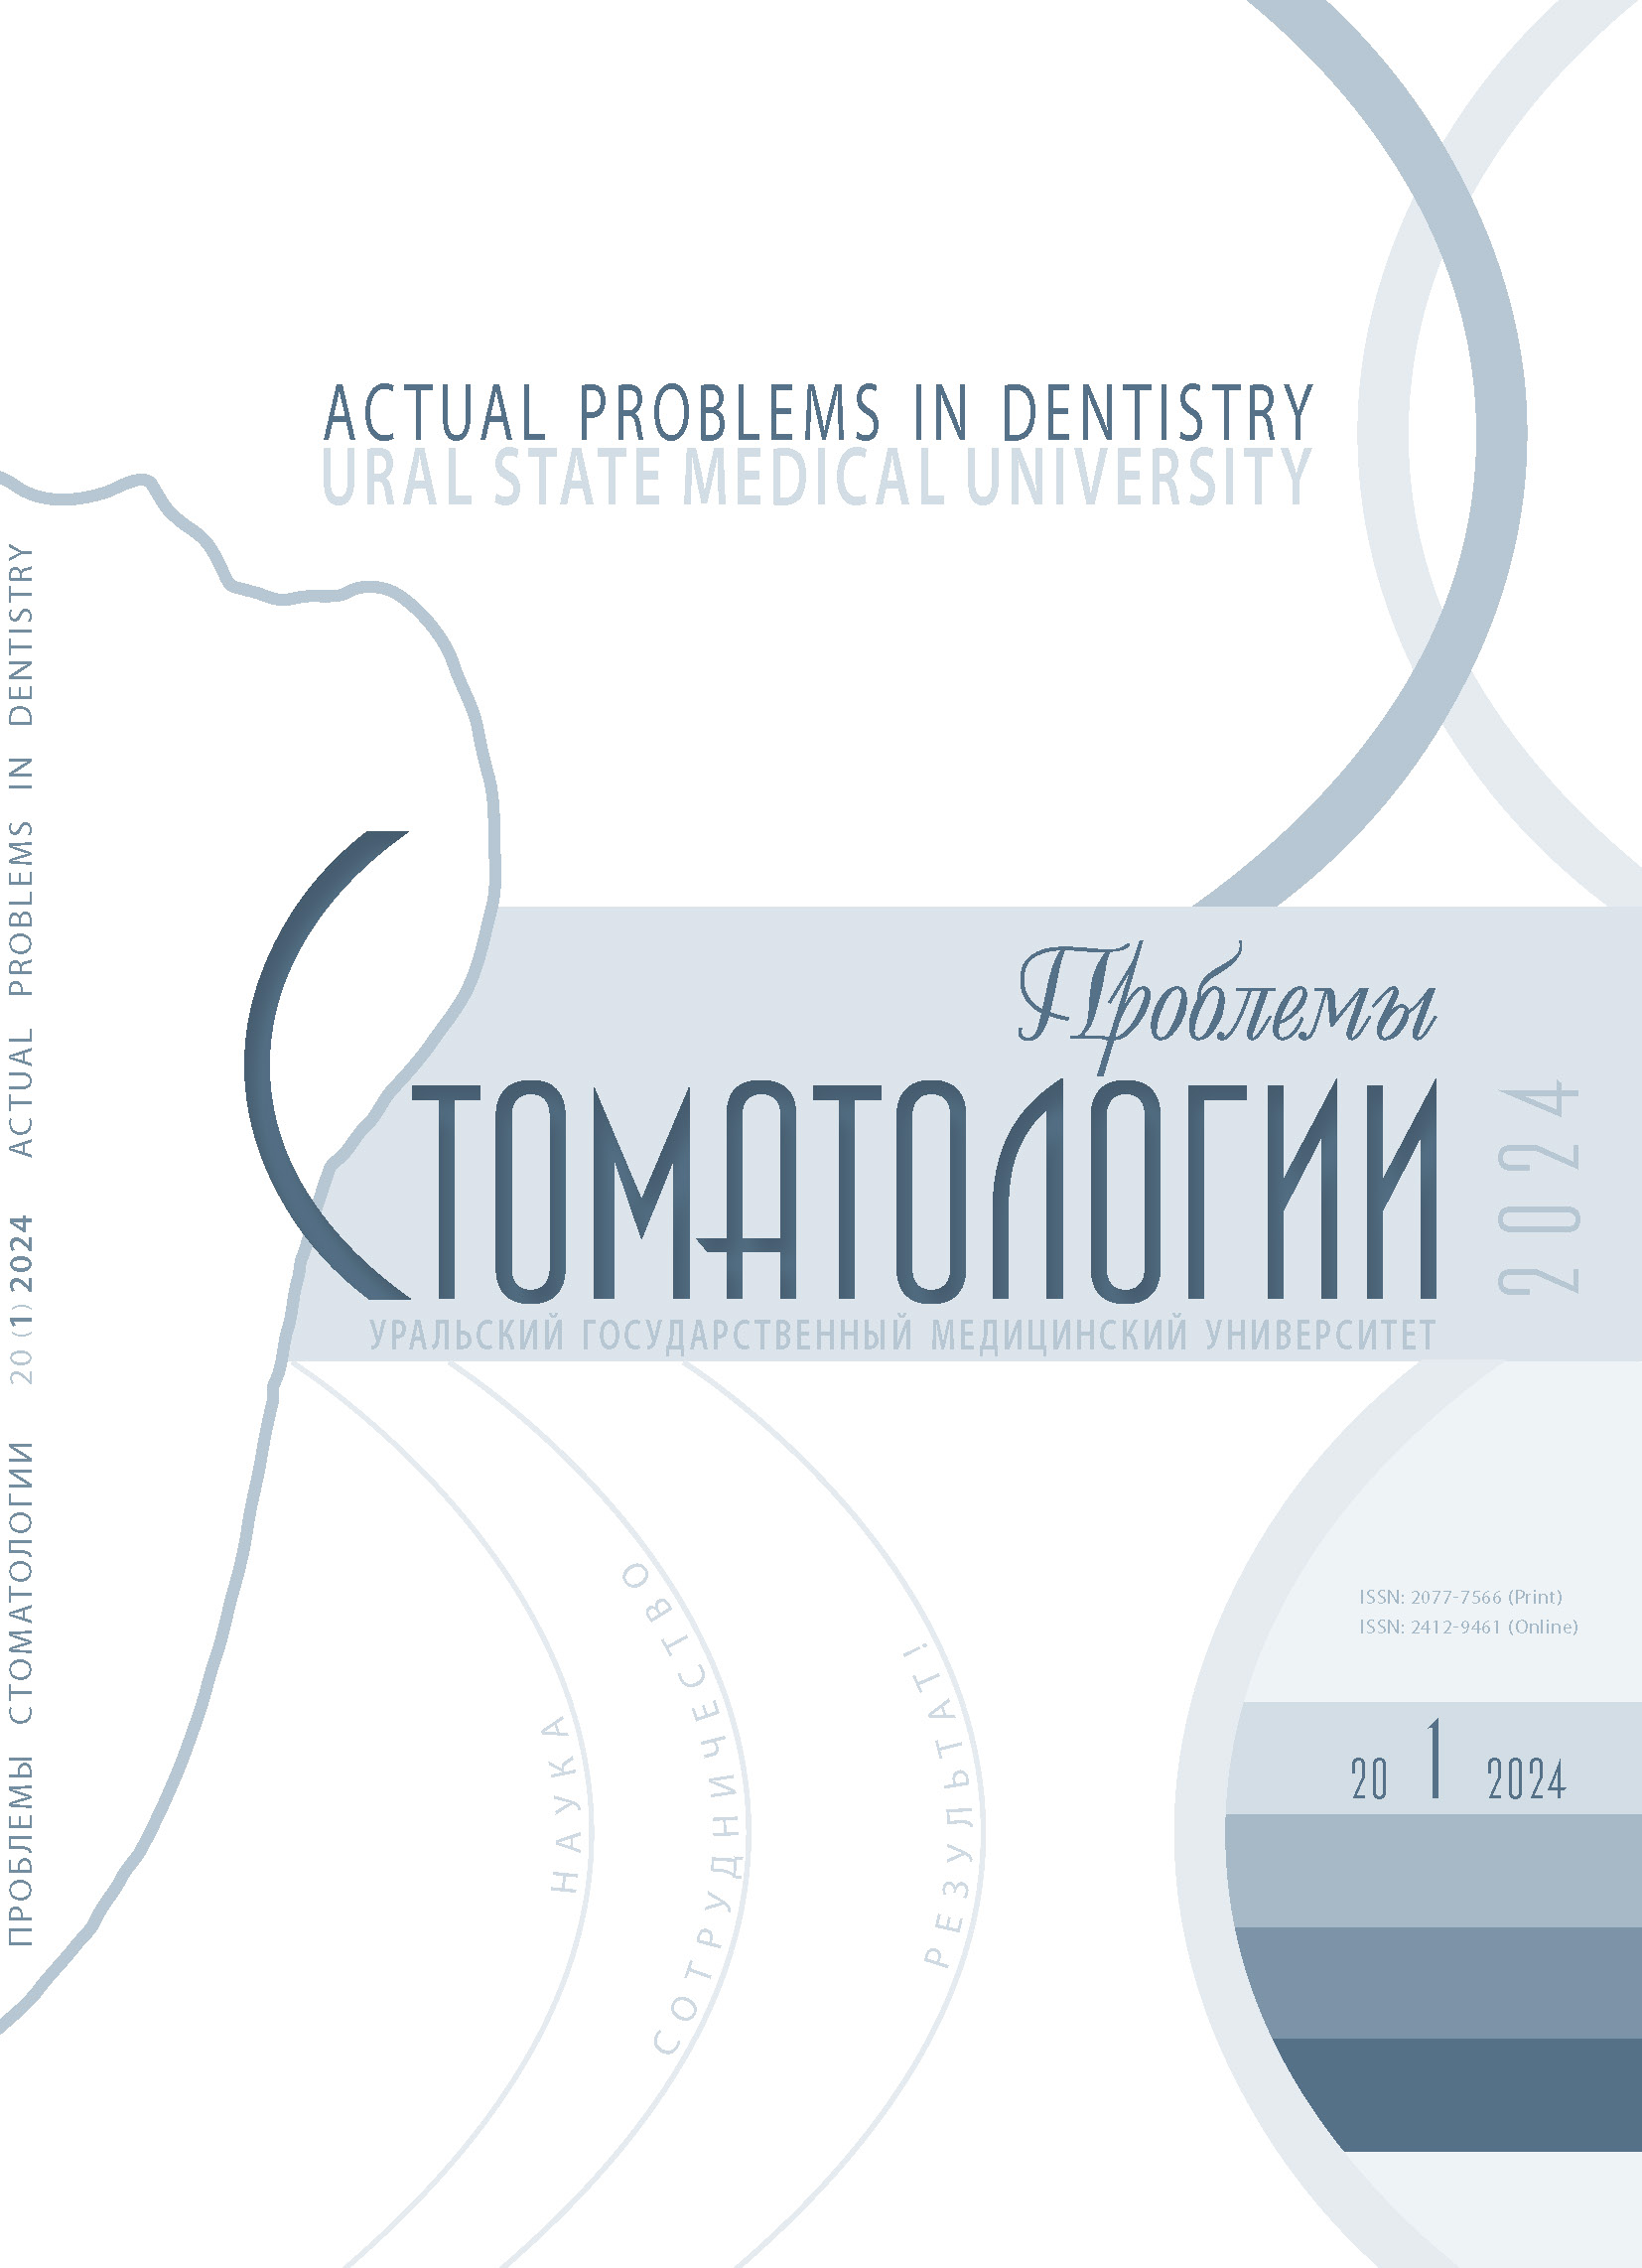                         ANALYSIS OF RISK FACTORS FOR XEROSTOMIA AND HEALTHY LIFESTYLE OF STUDENTS OF THE FACULTY OF DENTISTRY OF THE URAL STATE MEDICAL UNIVERSITY
            